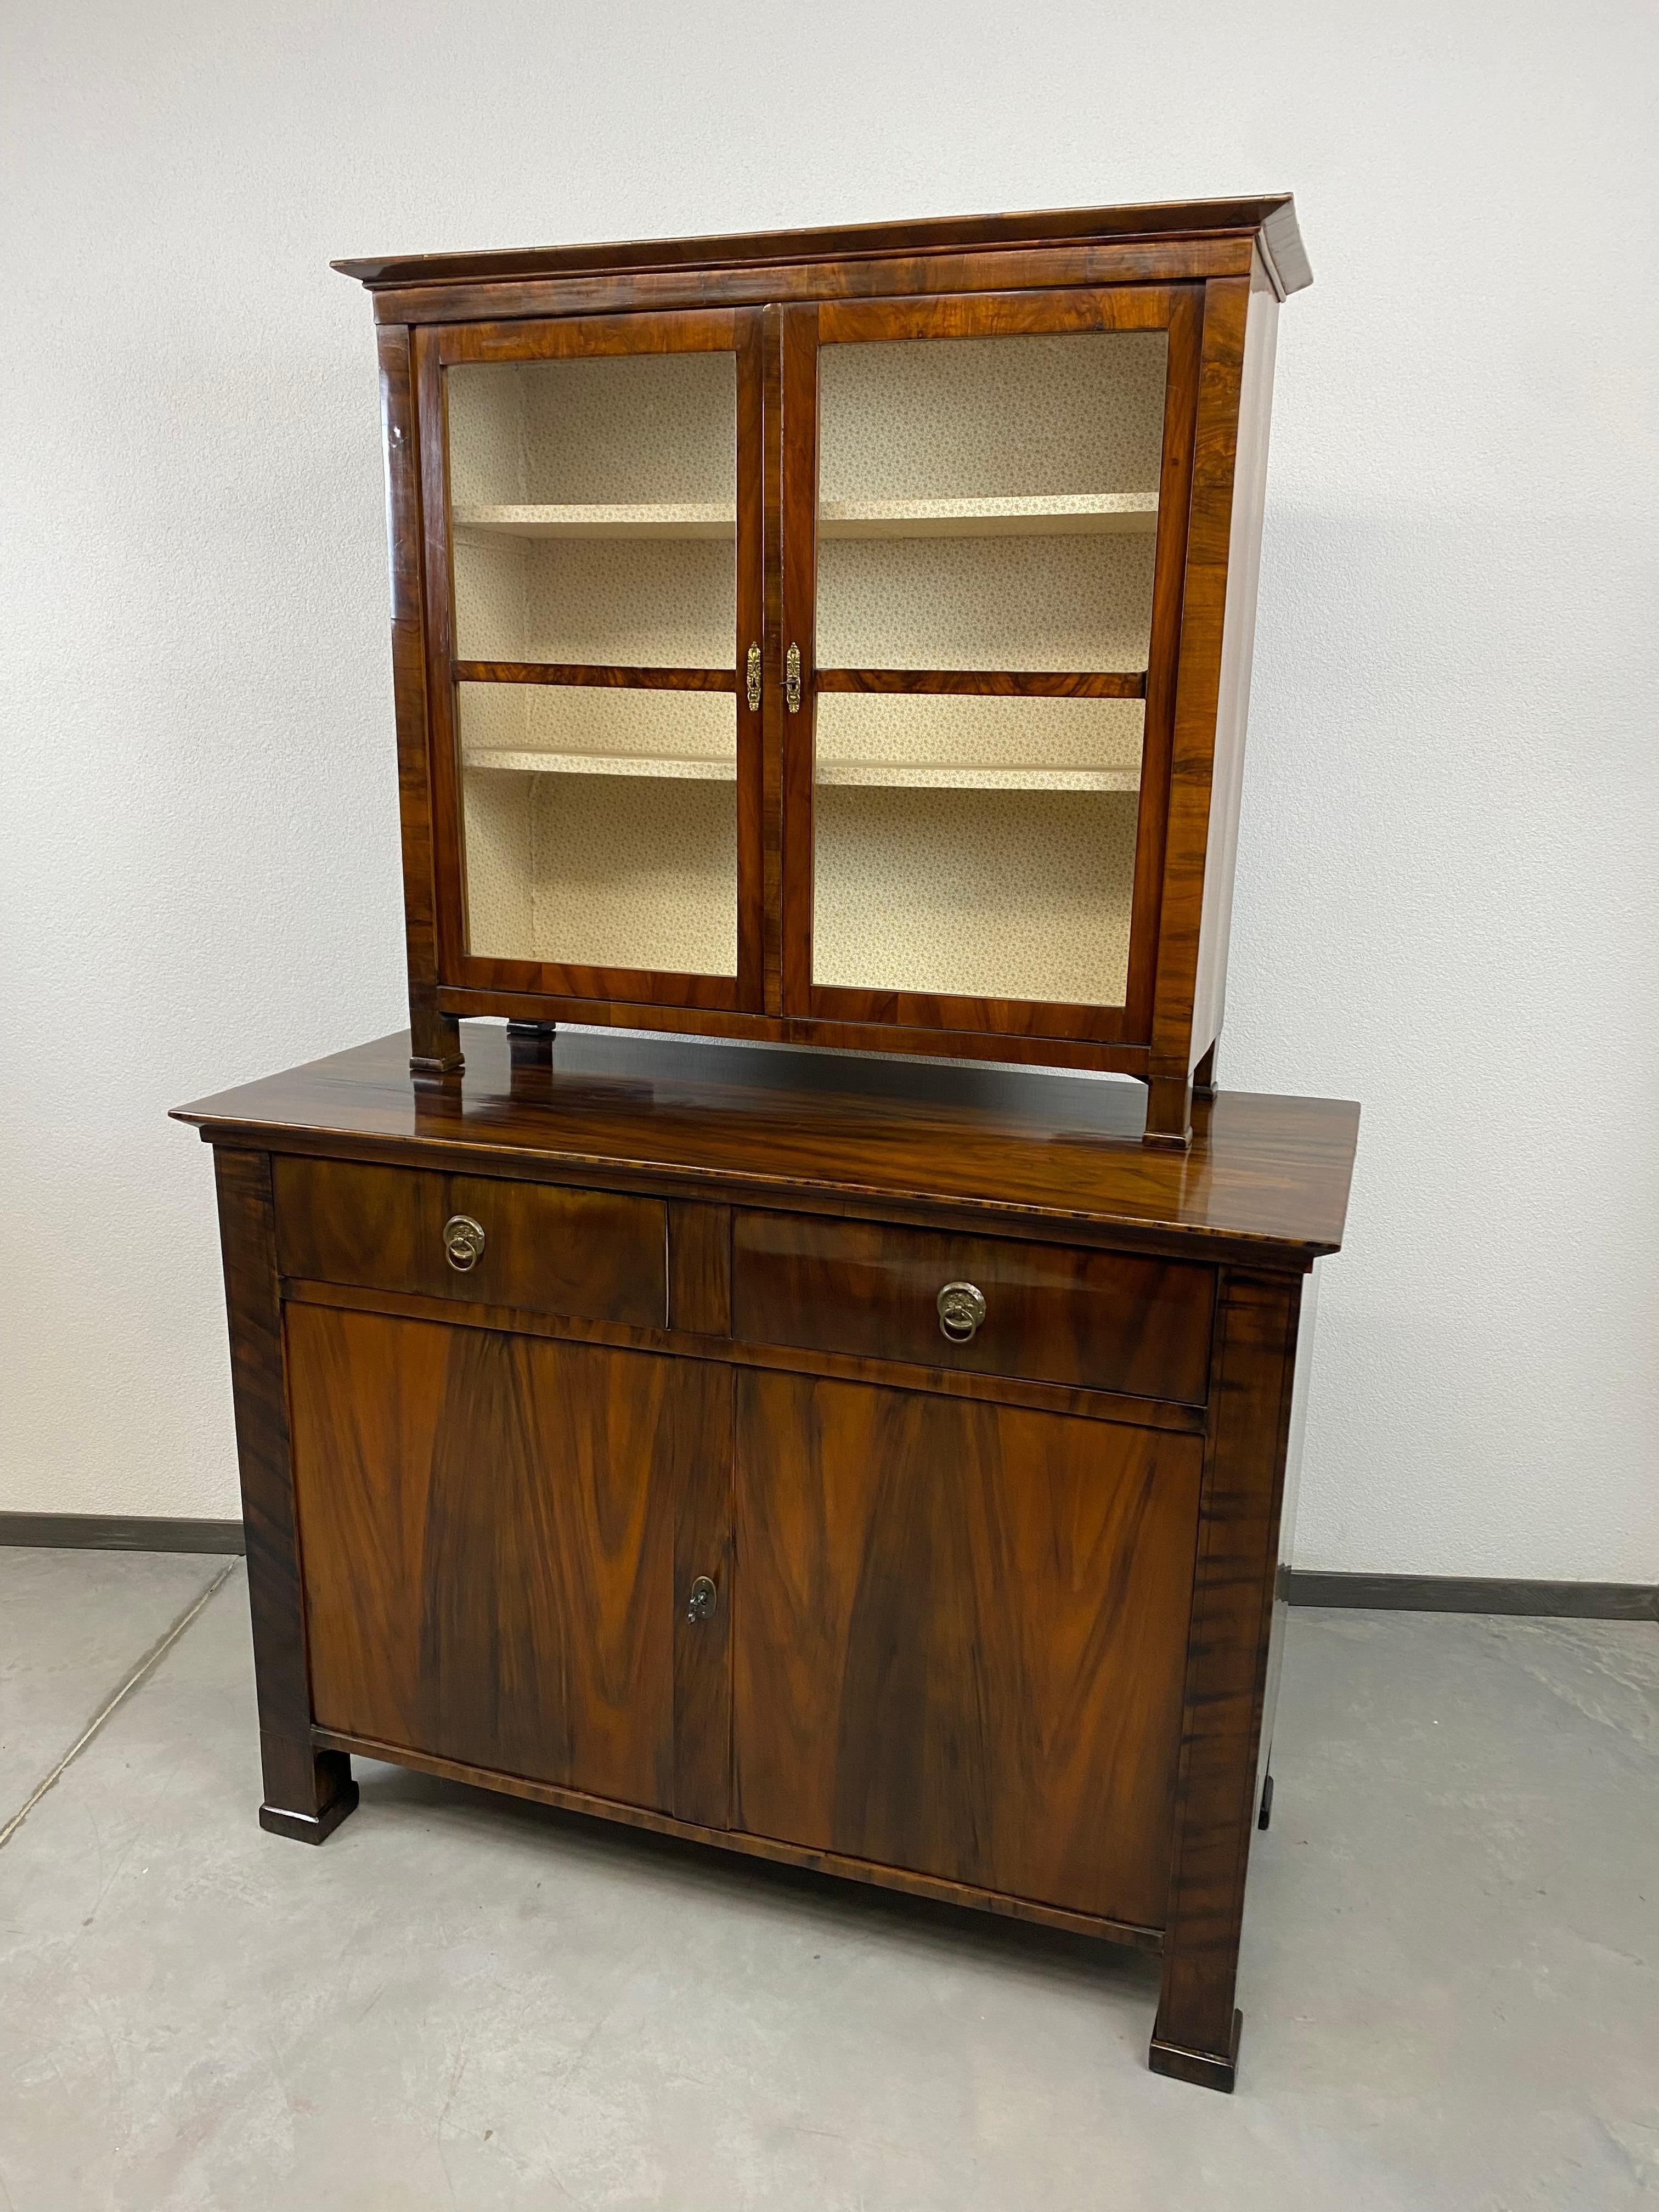 Fine biedermeier walnut cabinet in very good original condition with signs of usage.